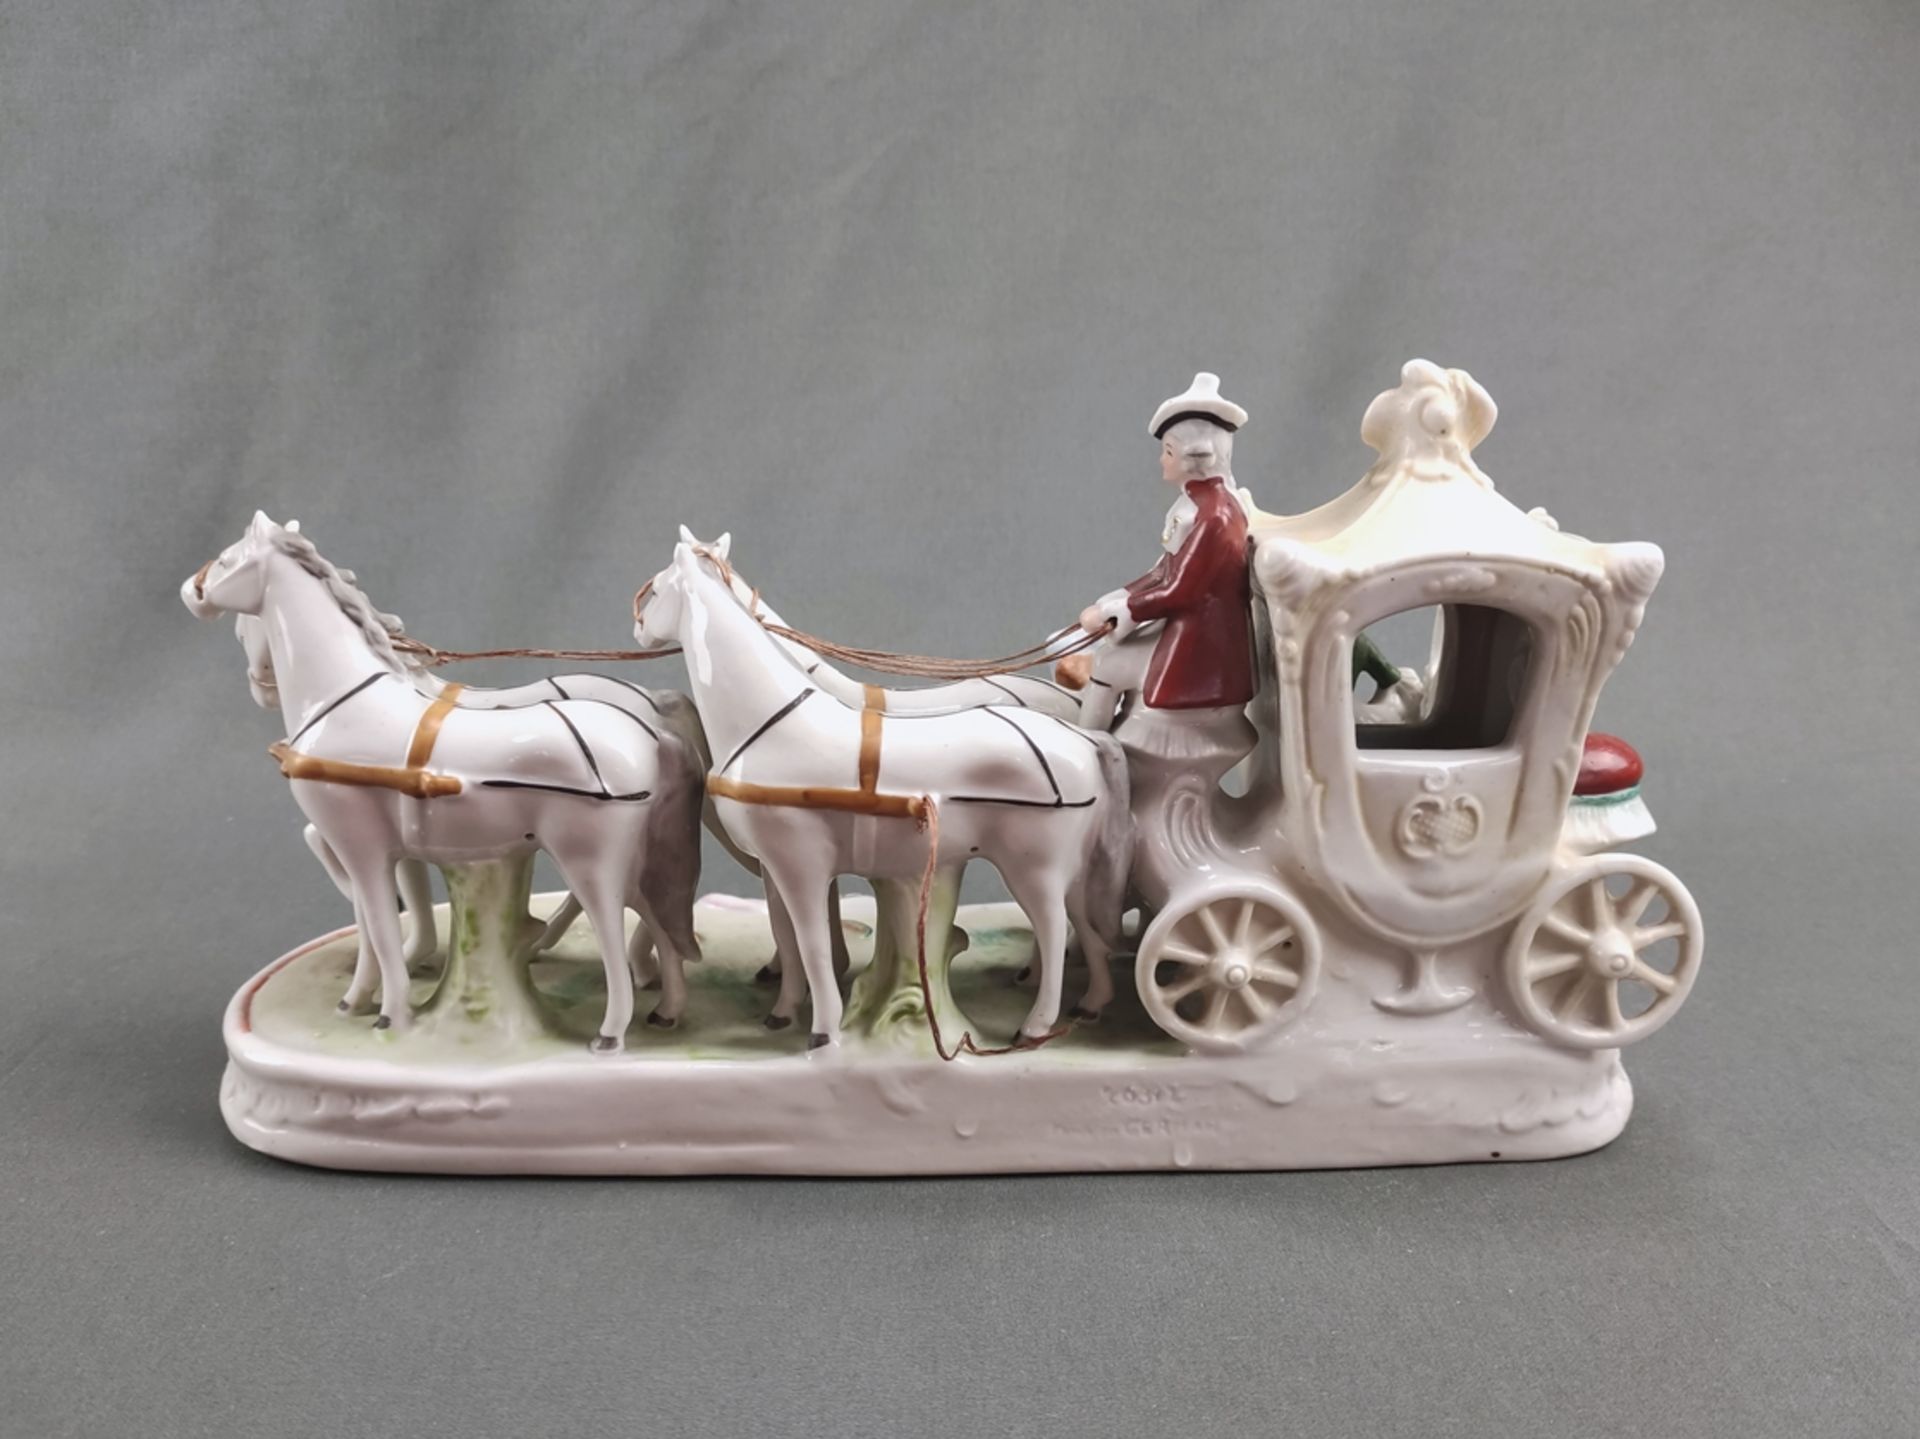 Porcelain group "Rococo Carriage", porcelain factory Carl Schneiders Erben, later Gräfenthal, Thuri - Image 2 of 4